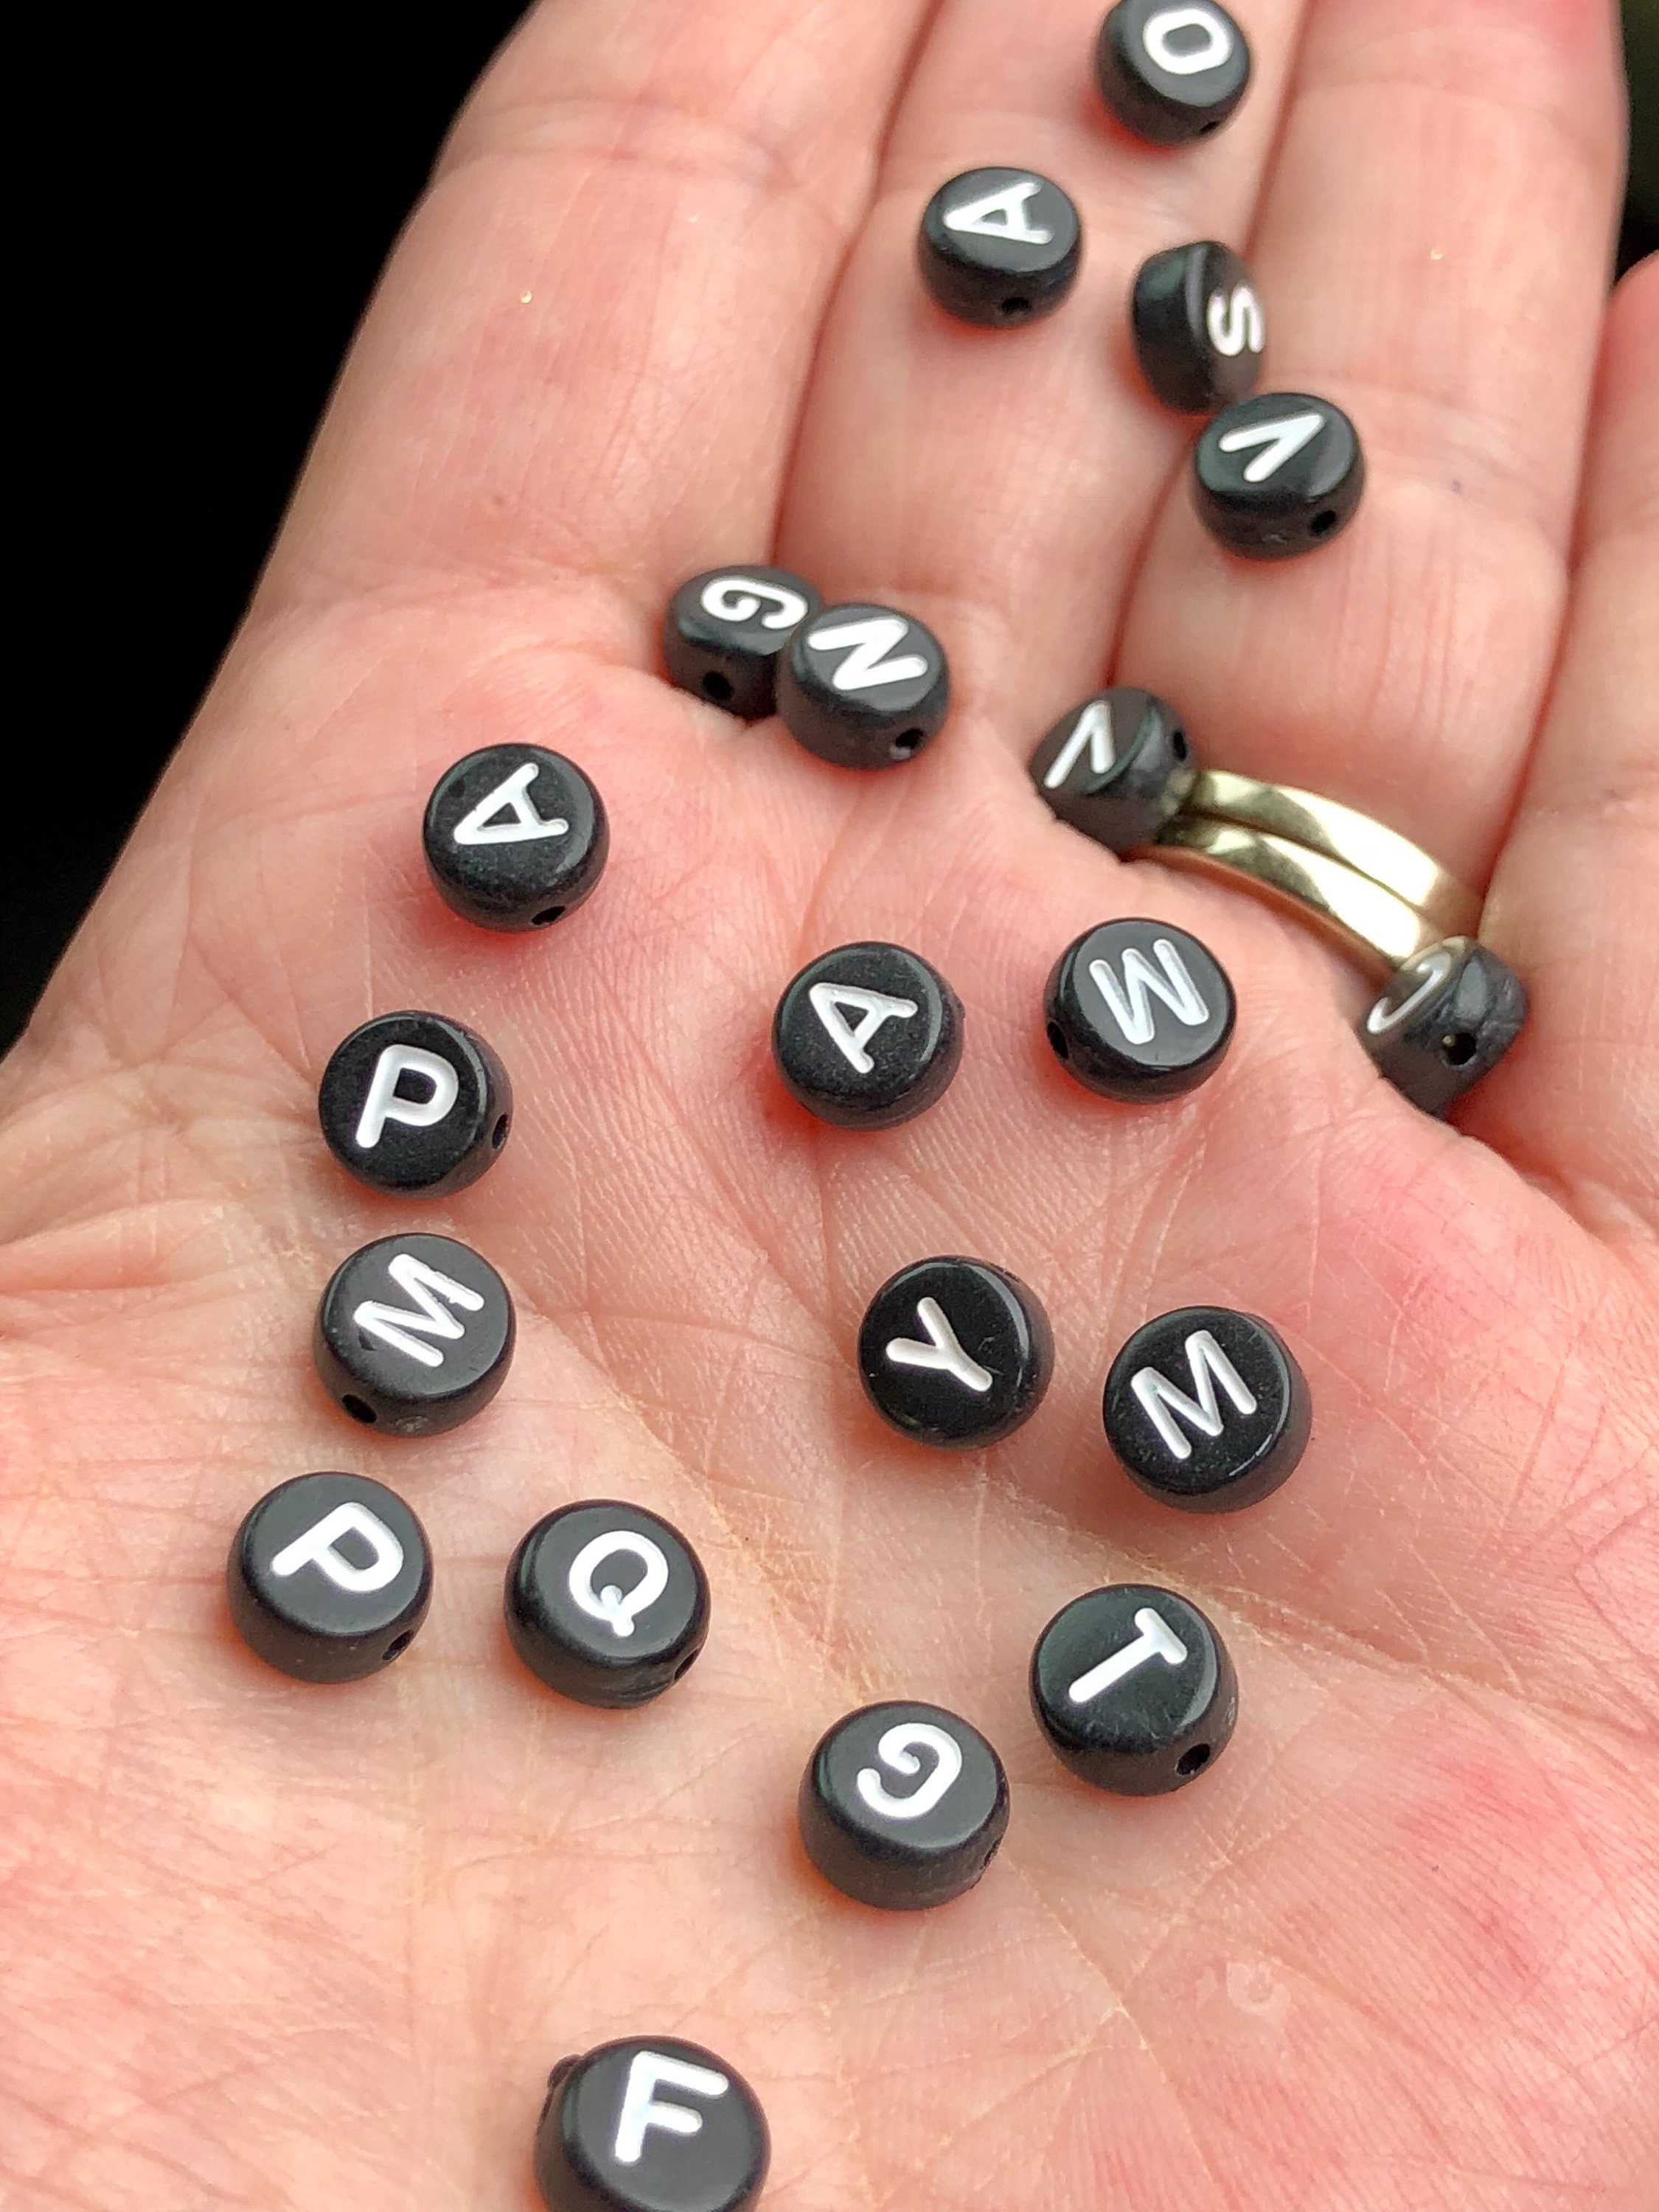 7mm Acrylic Alphabet Beads, Black With Silver Letters, Letter Beads, Word  Beads, Jewelry Beads, Bracelet Beads, Black Alphabet Beads 